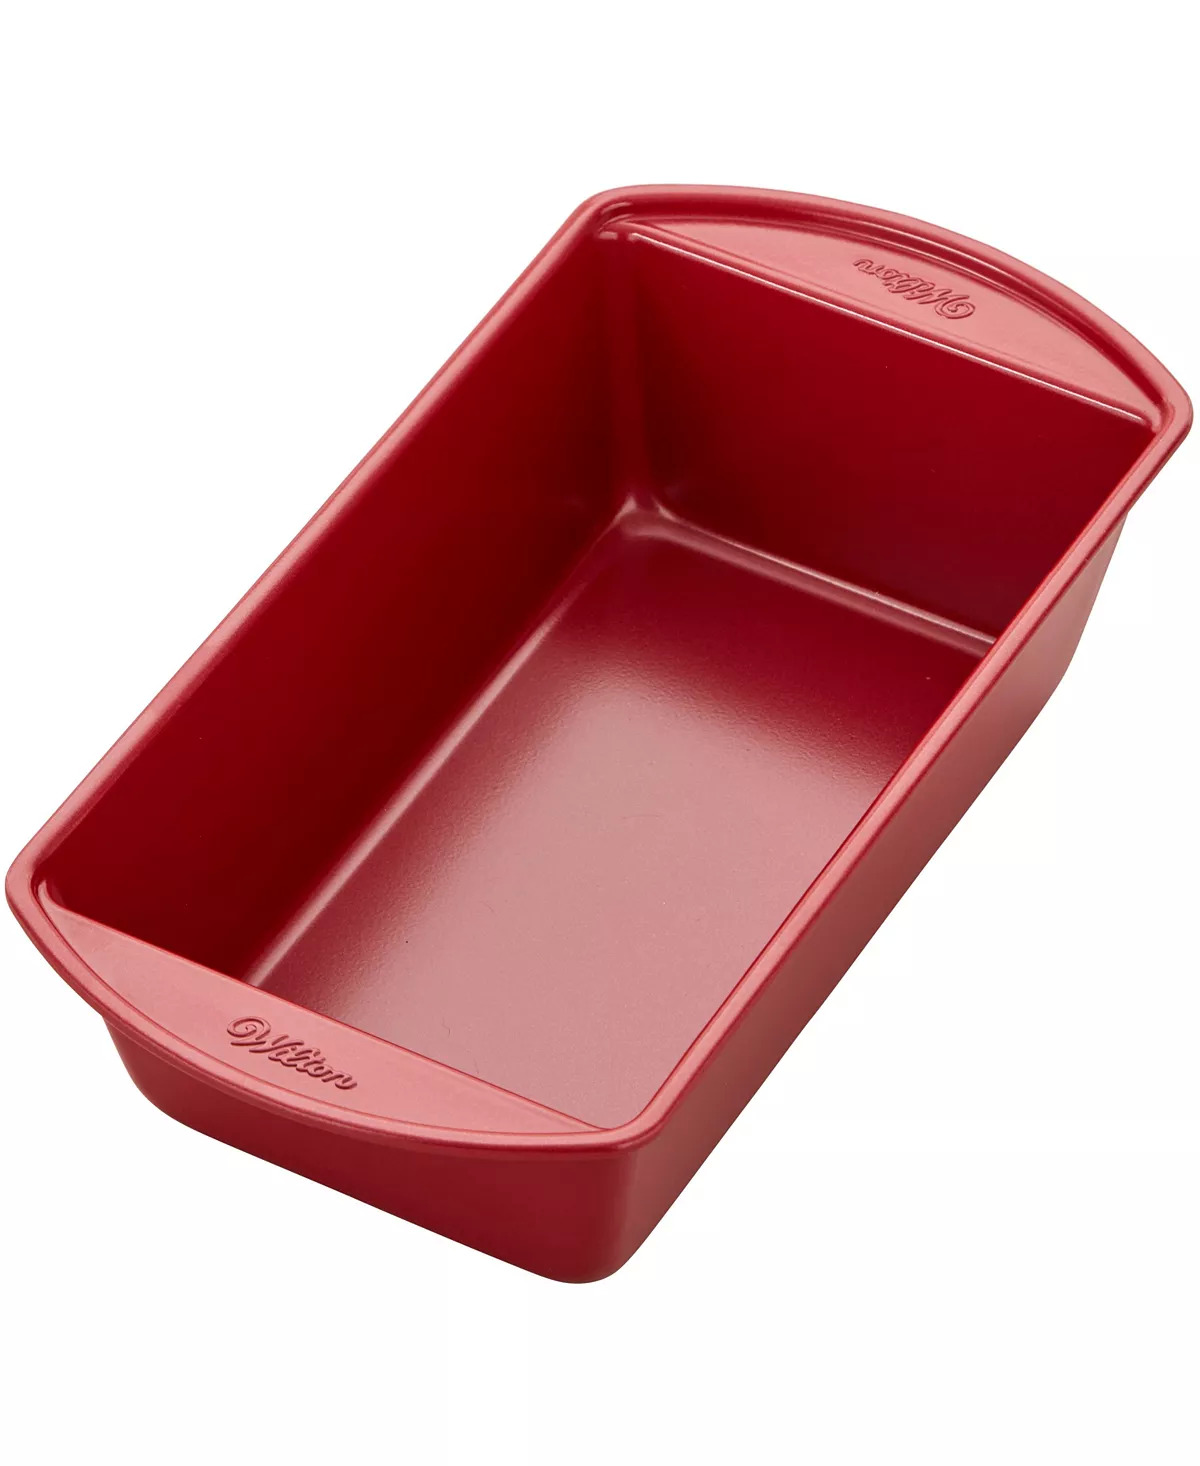 9.25" x 5.25" Wilton Nonstick Loaf Pan $5 + Free Store Pickup at Macy's or Free Shipping on $25+